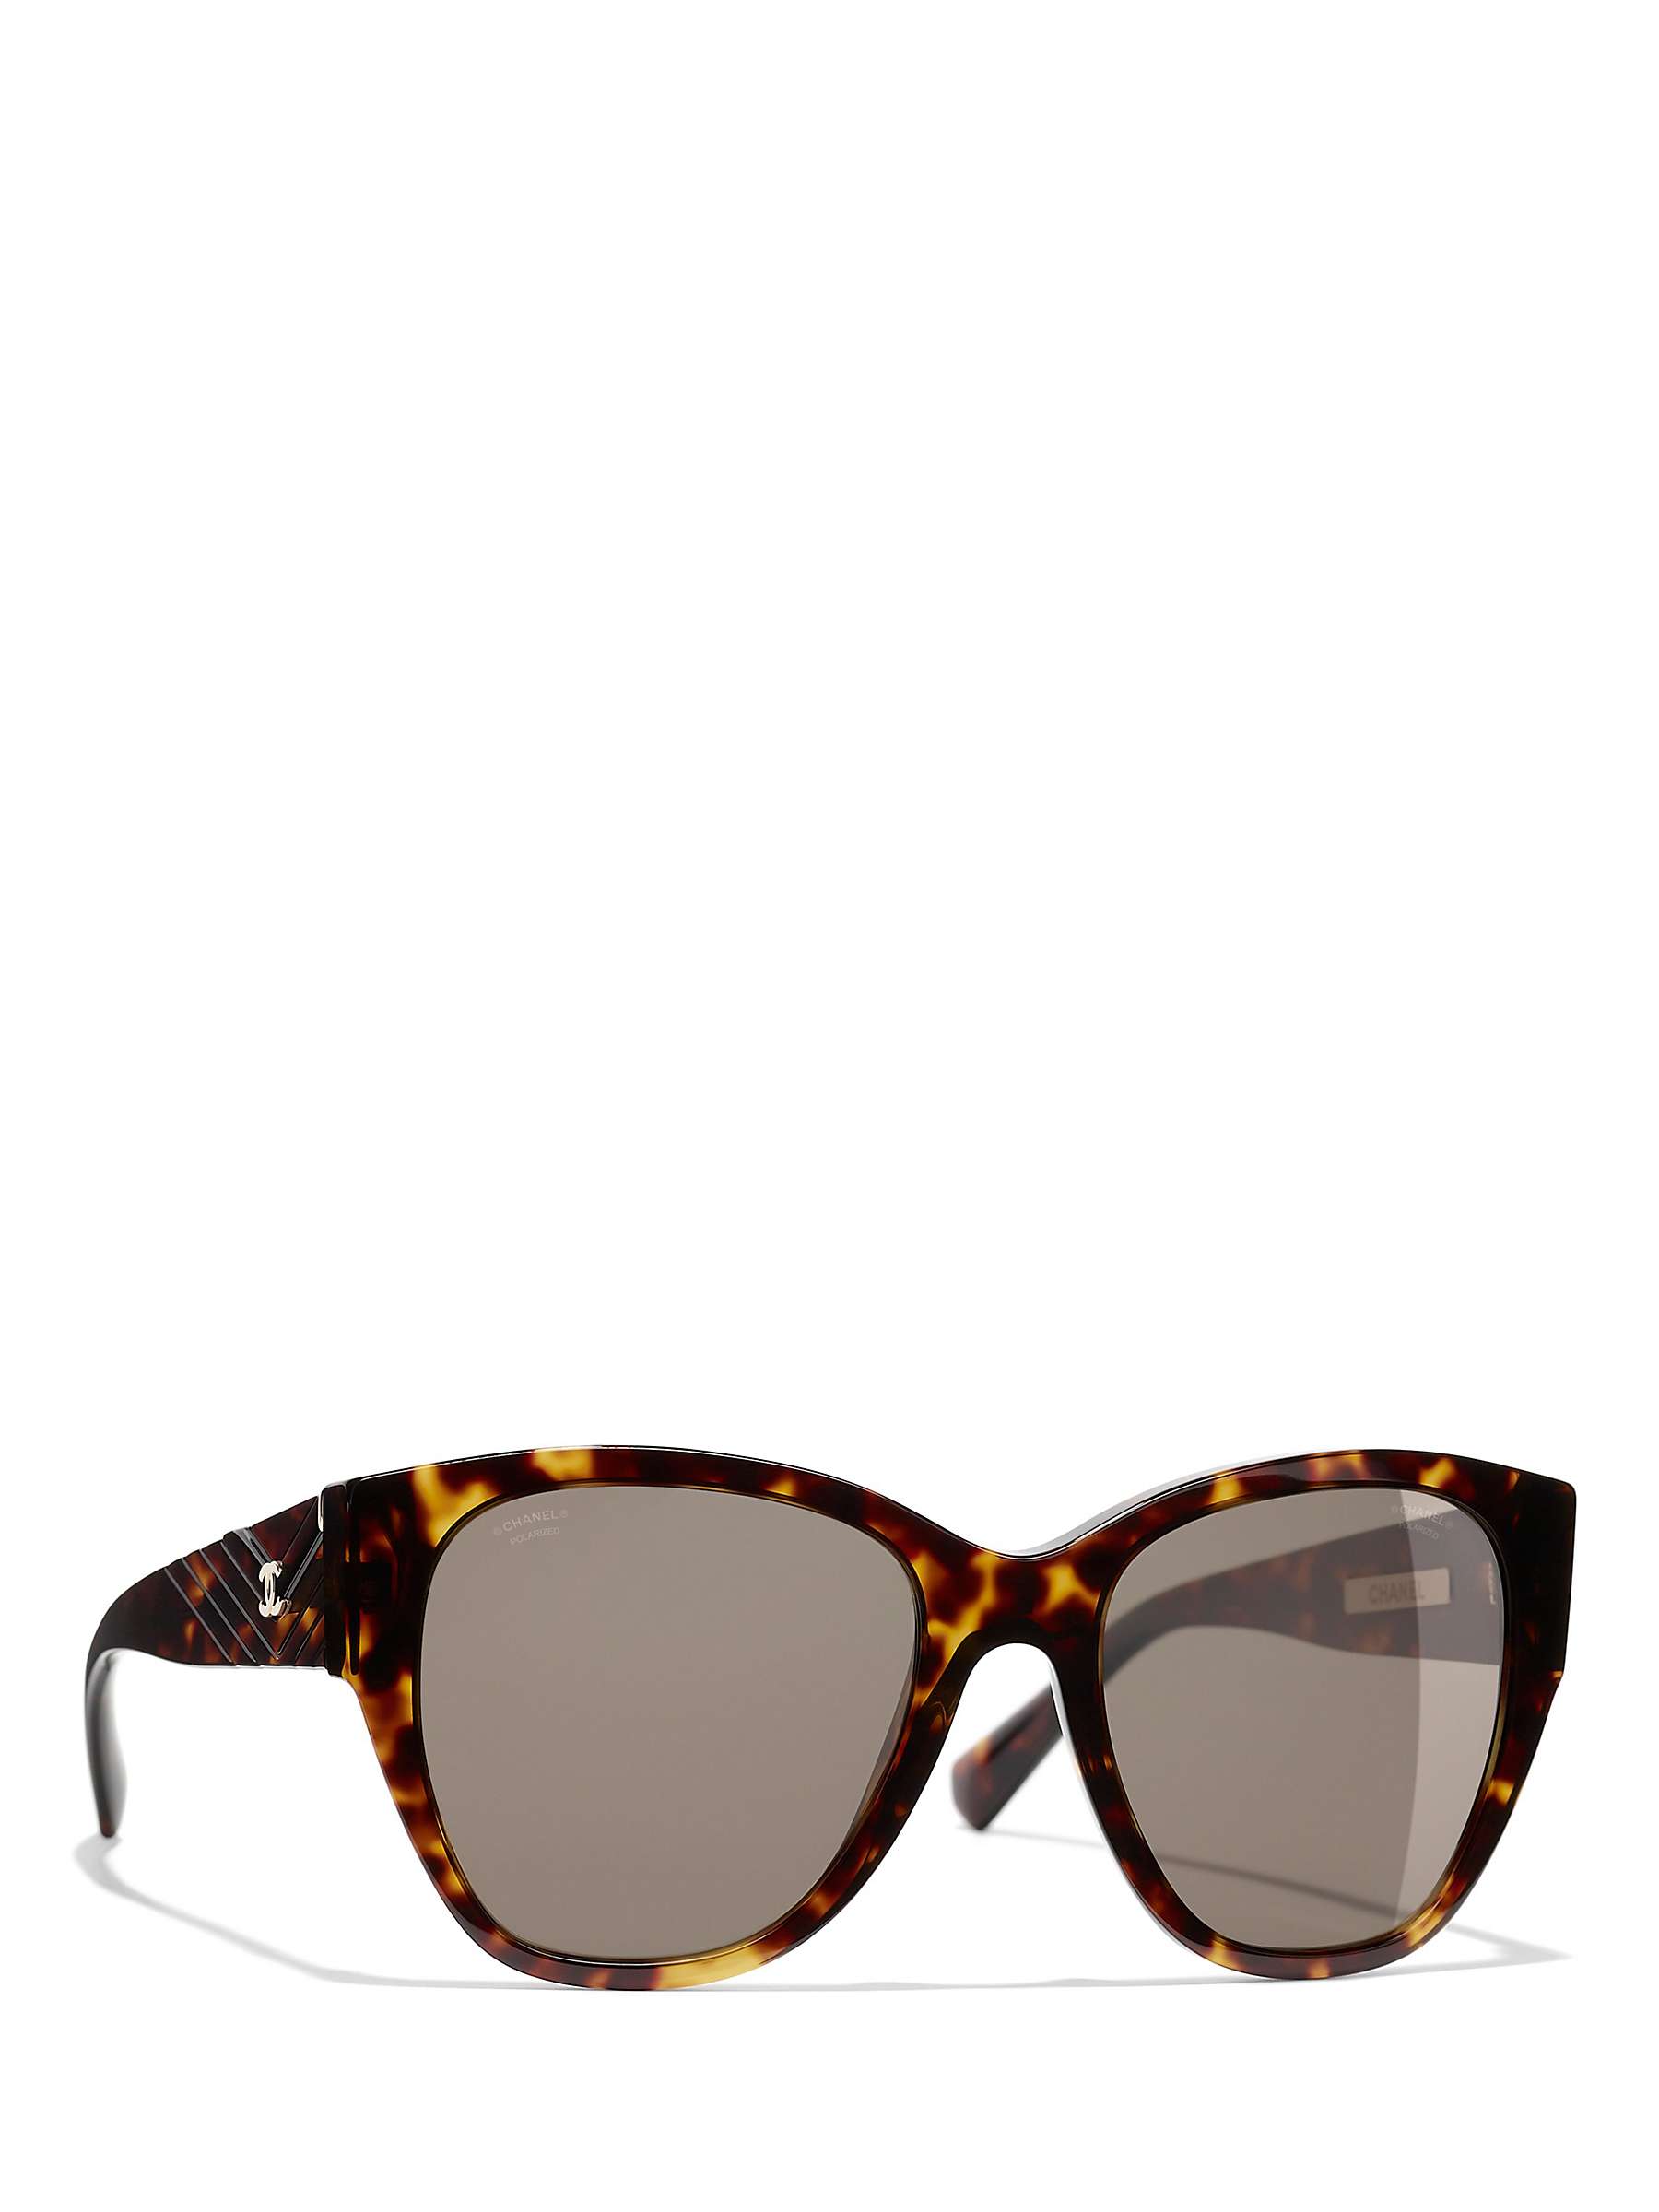 Buy CHANEL Polarised Butterfly Sunglasses CH5412 Havana/Brown Online at johnlewis.com